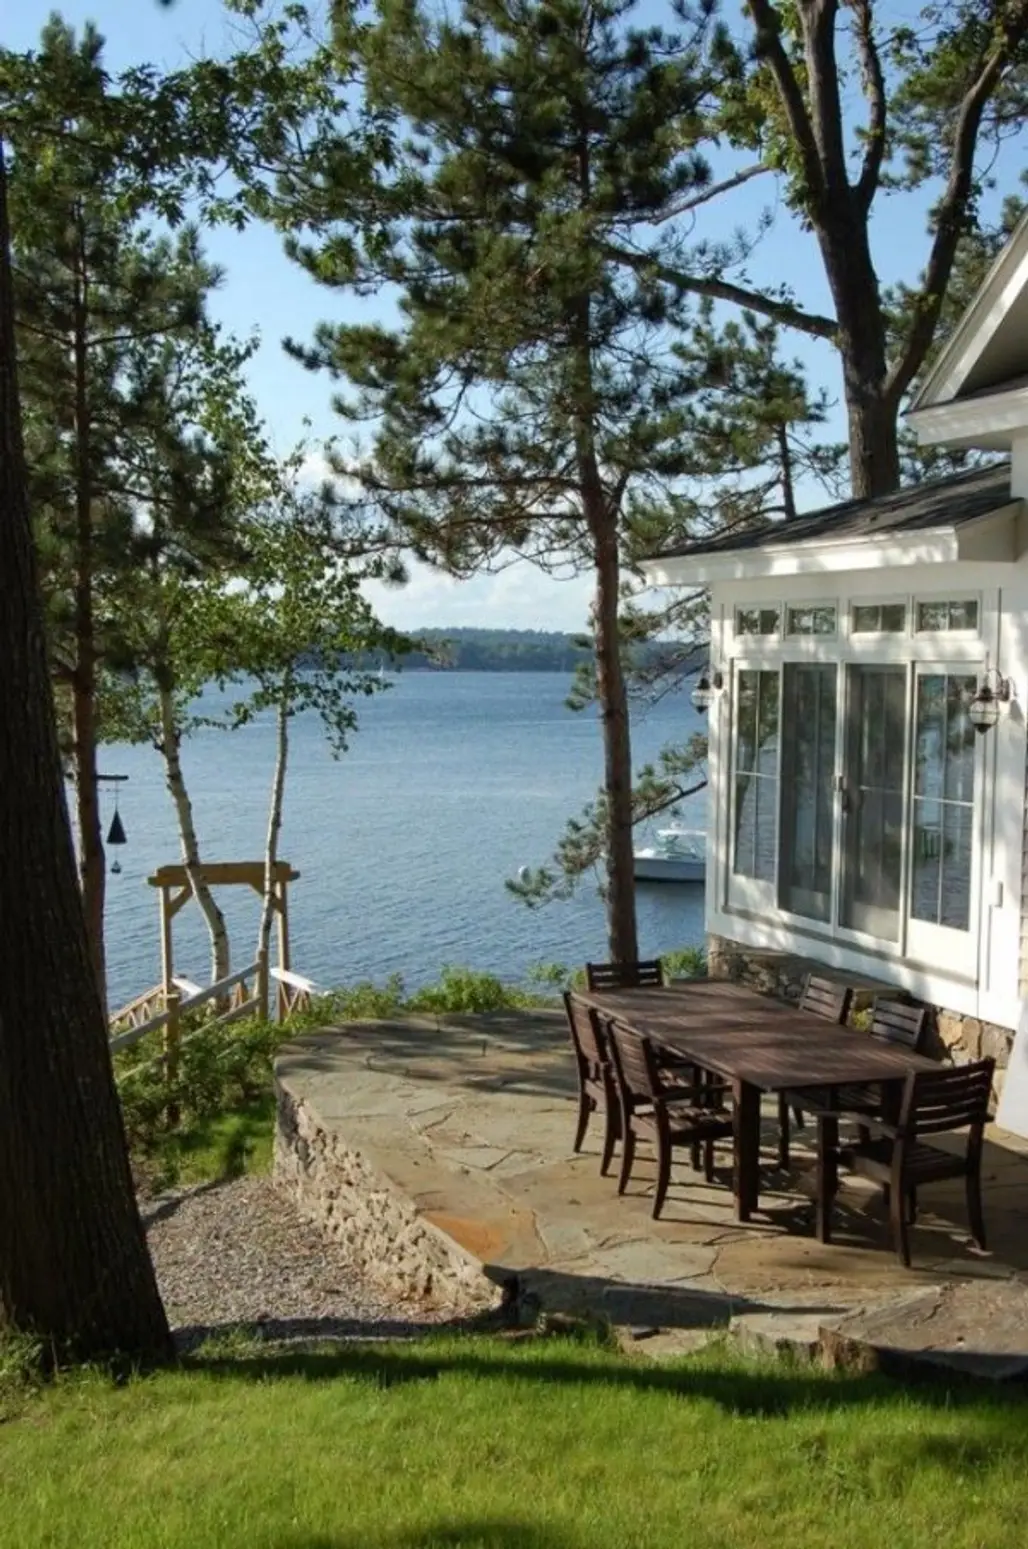 Dining outside is a Must at a Lakeside House